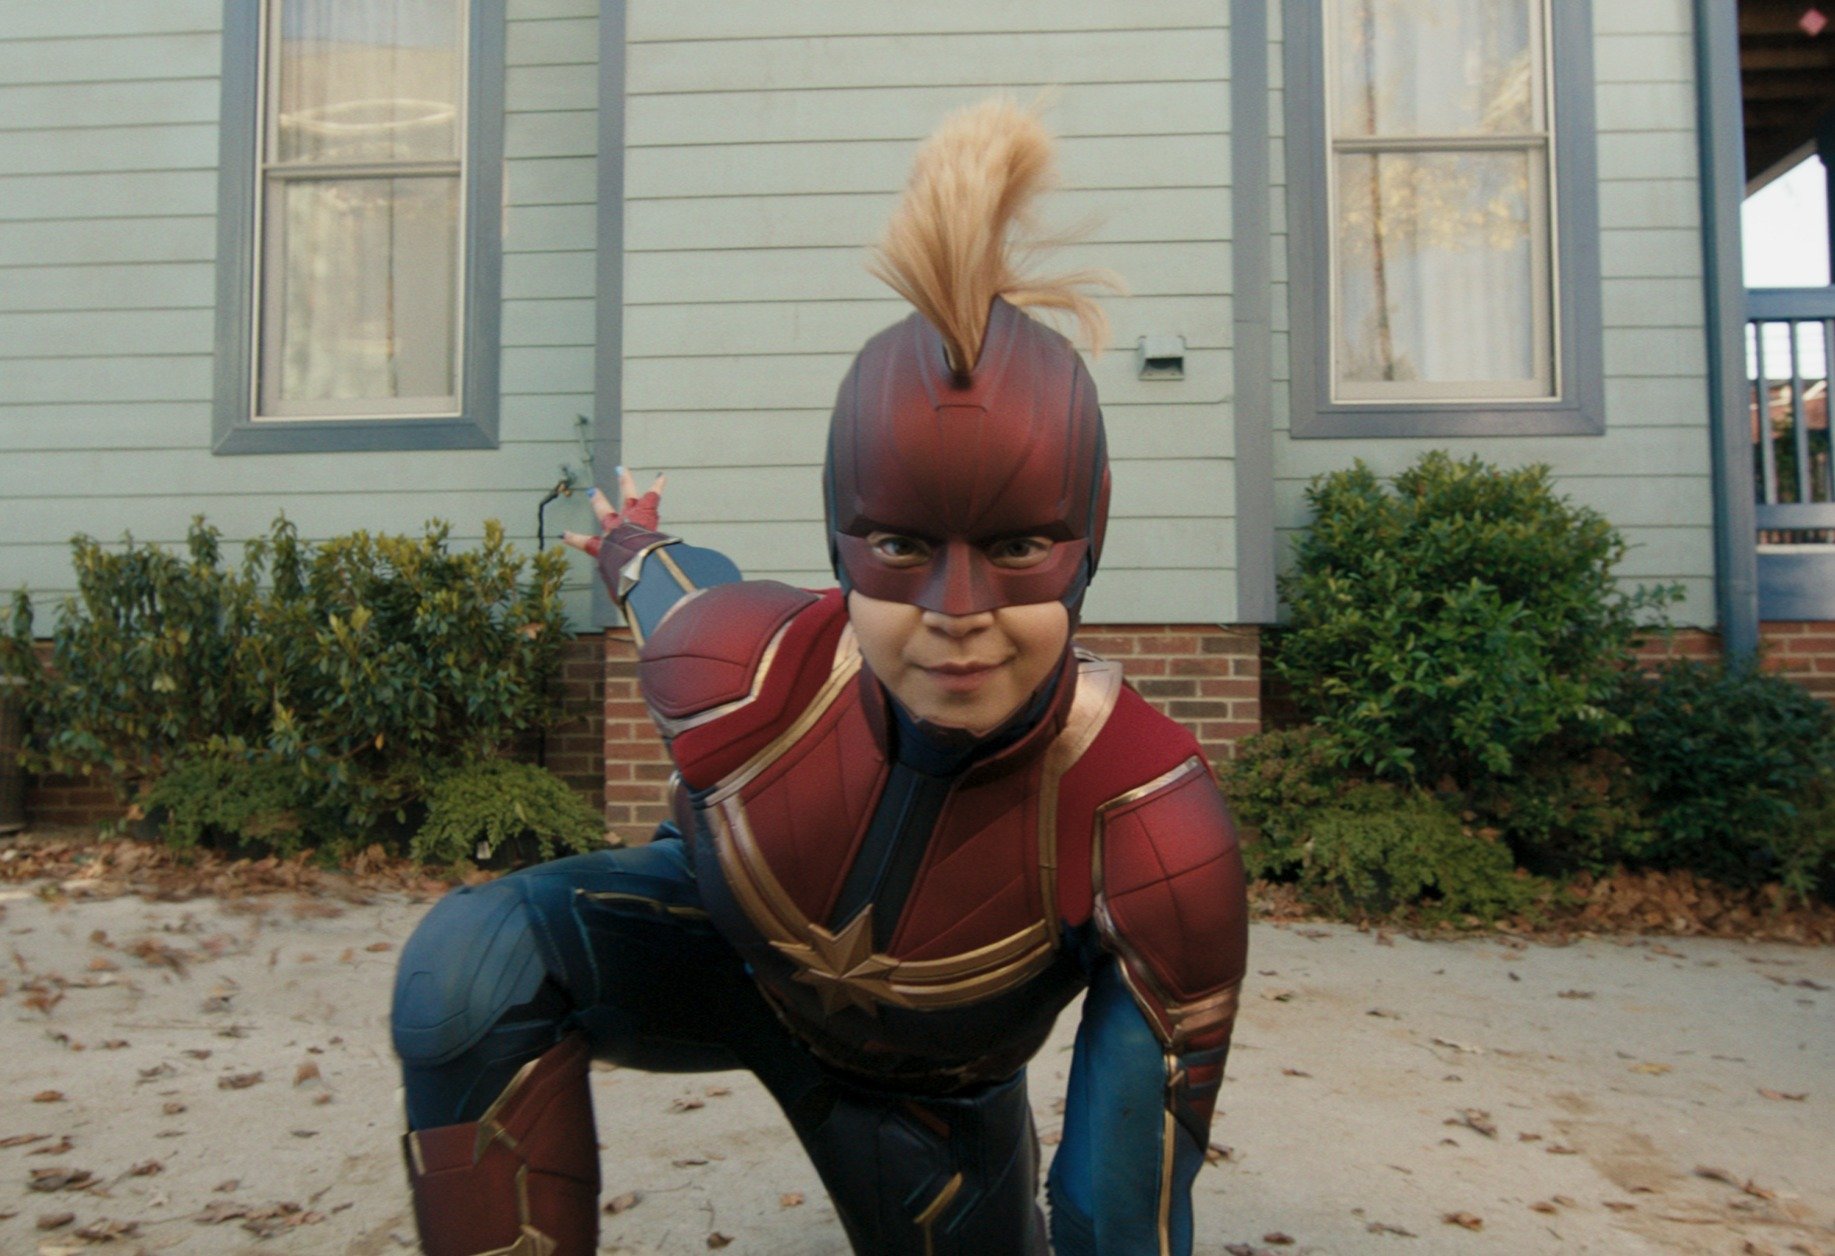 Iman Vellani as Kamala Khan in 'Ms. Marvel,' which has an episode 2 release date of June 15. She's wearing a Captain Marvel costume, and she's doing a superhero kneeling pose in front of her house.